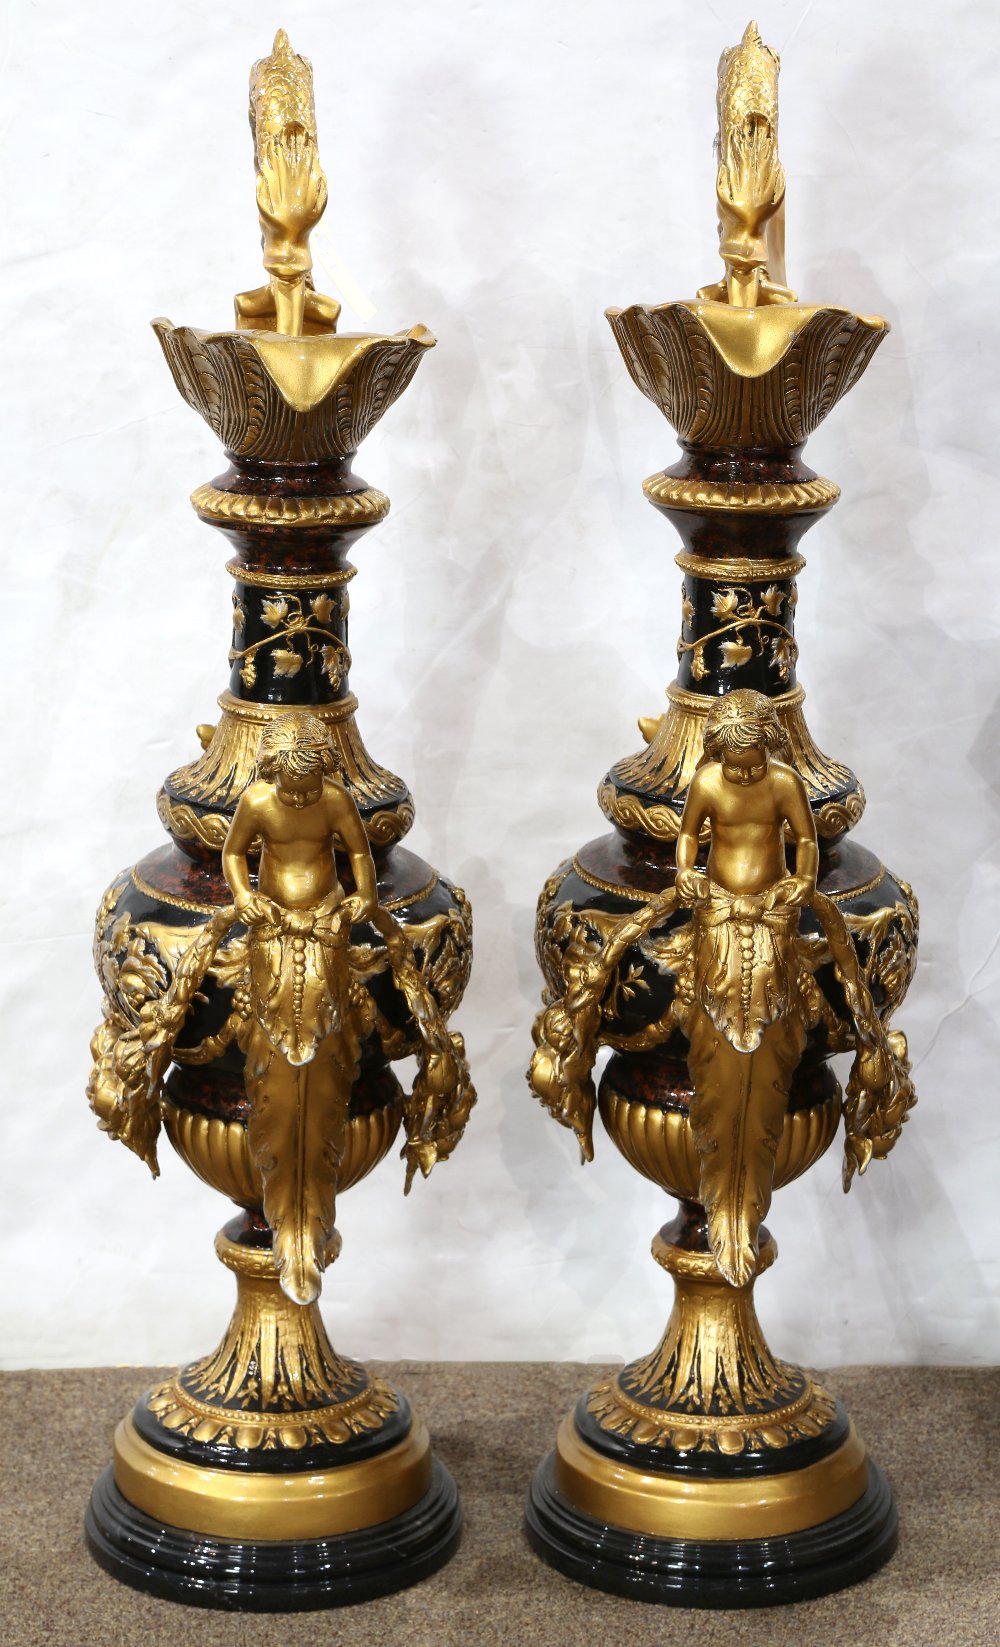 Pair of monumental Neoclassical style ewers, each having a dolphin form handle, above the - Image 2 of 5